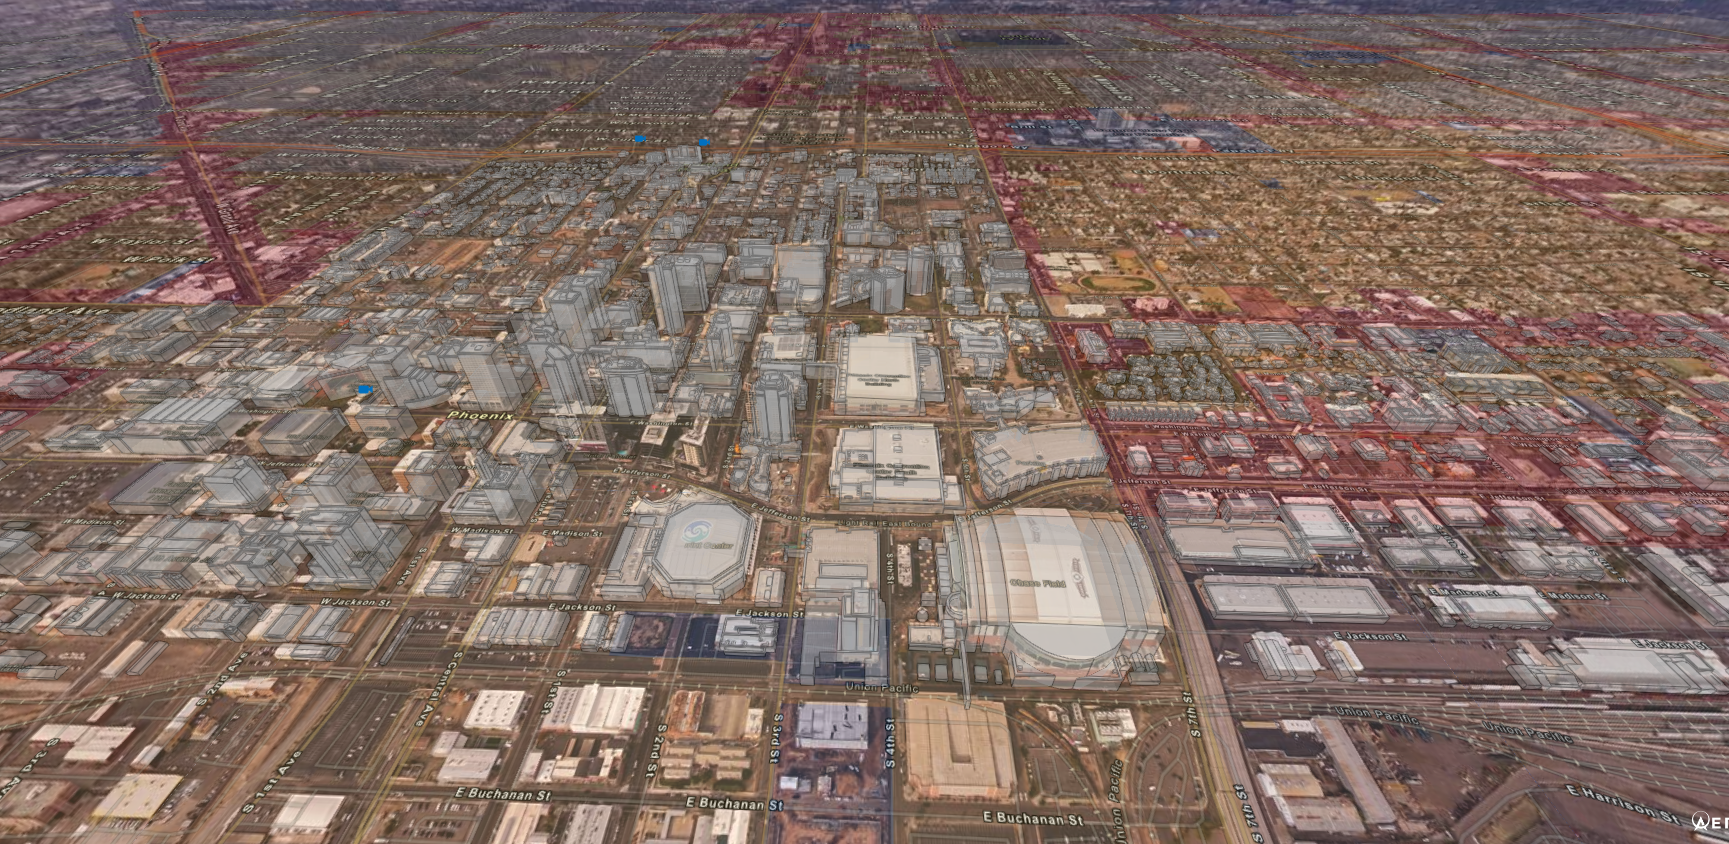 3D models overlaid with AerialSphere imagery and zoning data in Downtown Phoenix.